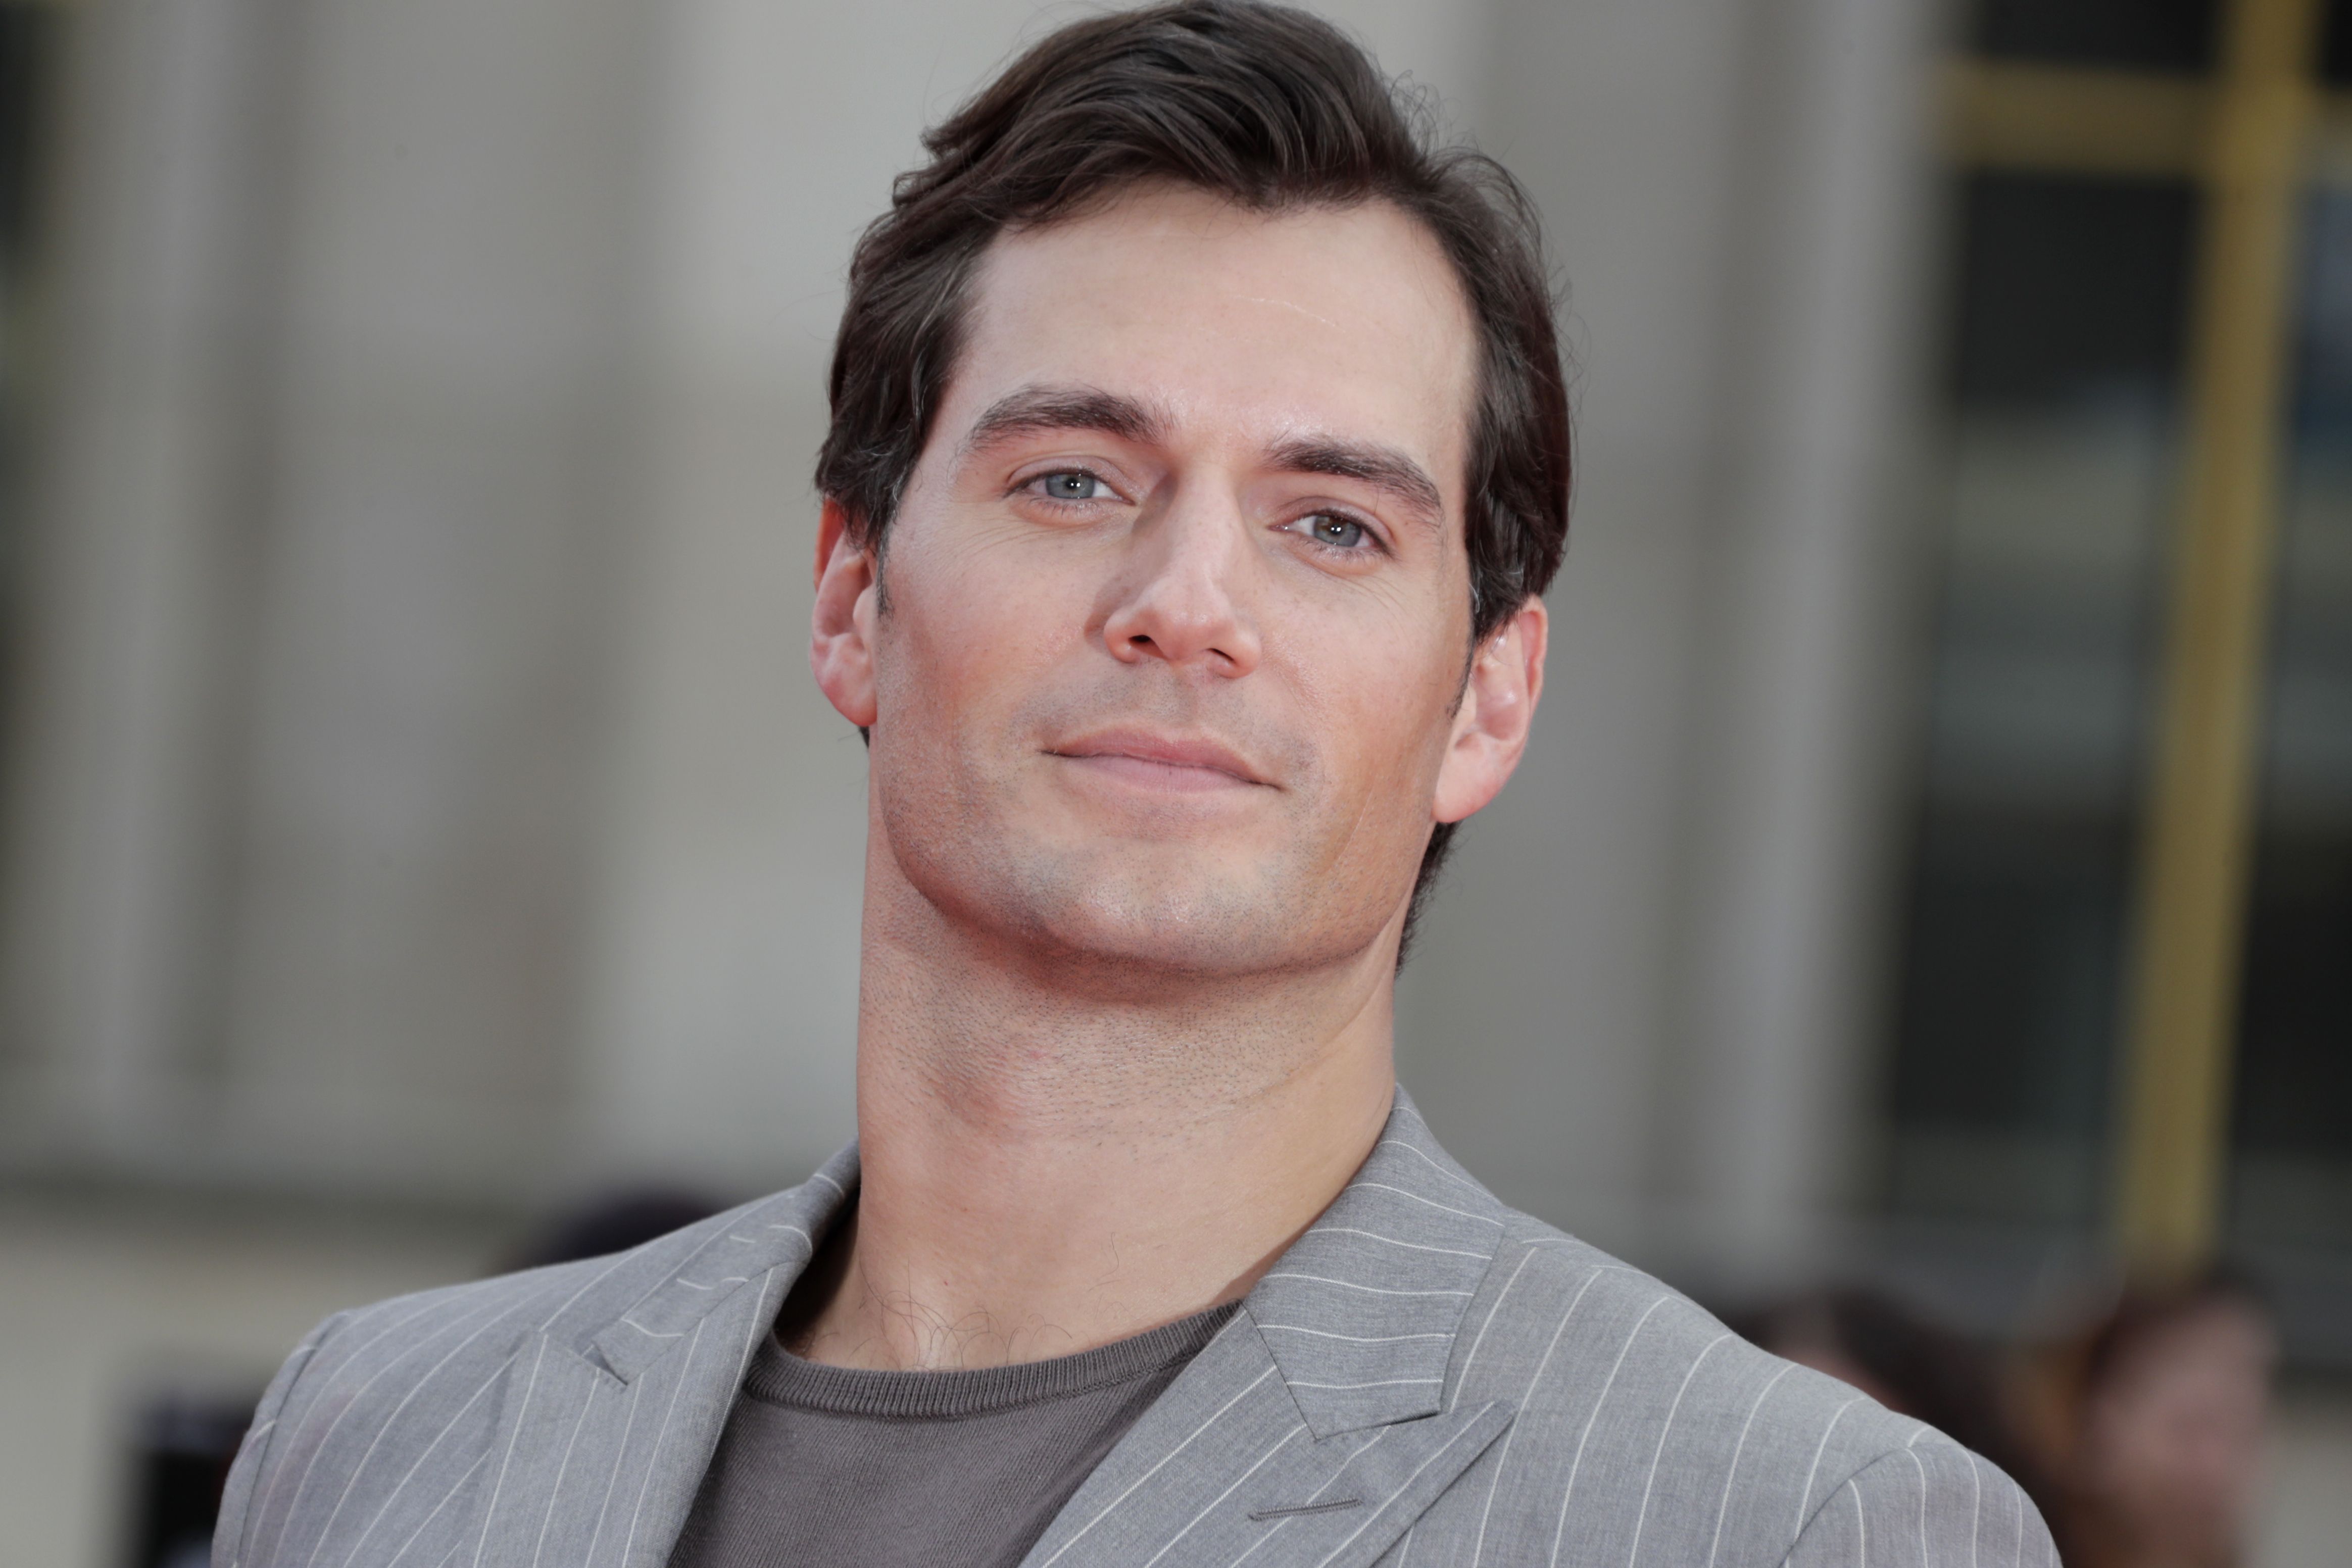 british-actor-henry-cavill-poses-on-the-red-carpet-as-he-news-photo-1581433962.jpg